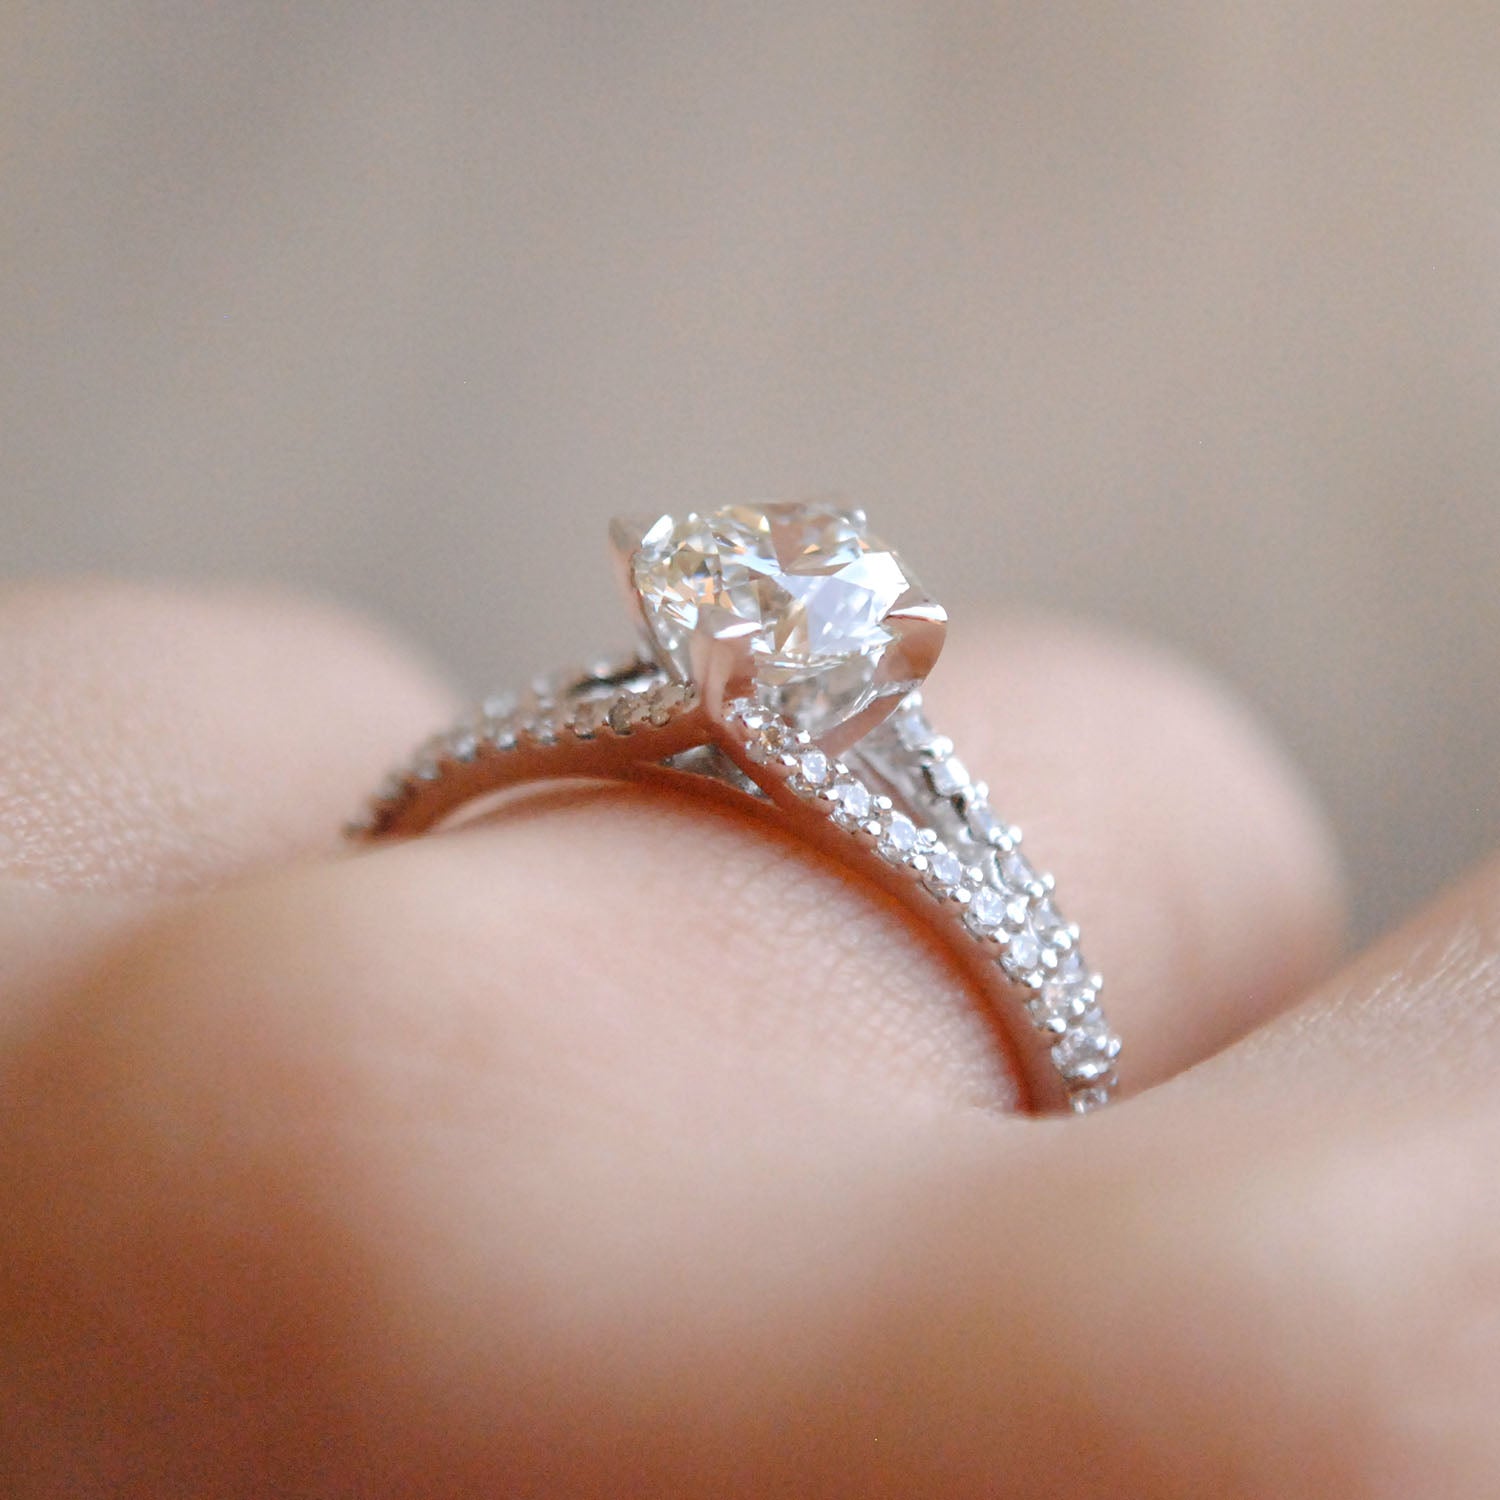 VVS Diamond Clarity: Is the Difference Worth It?